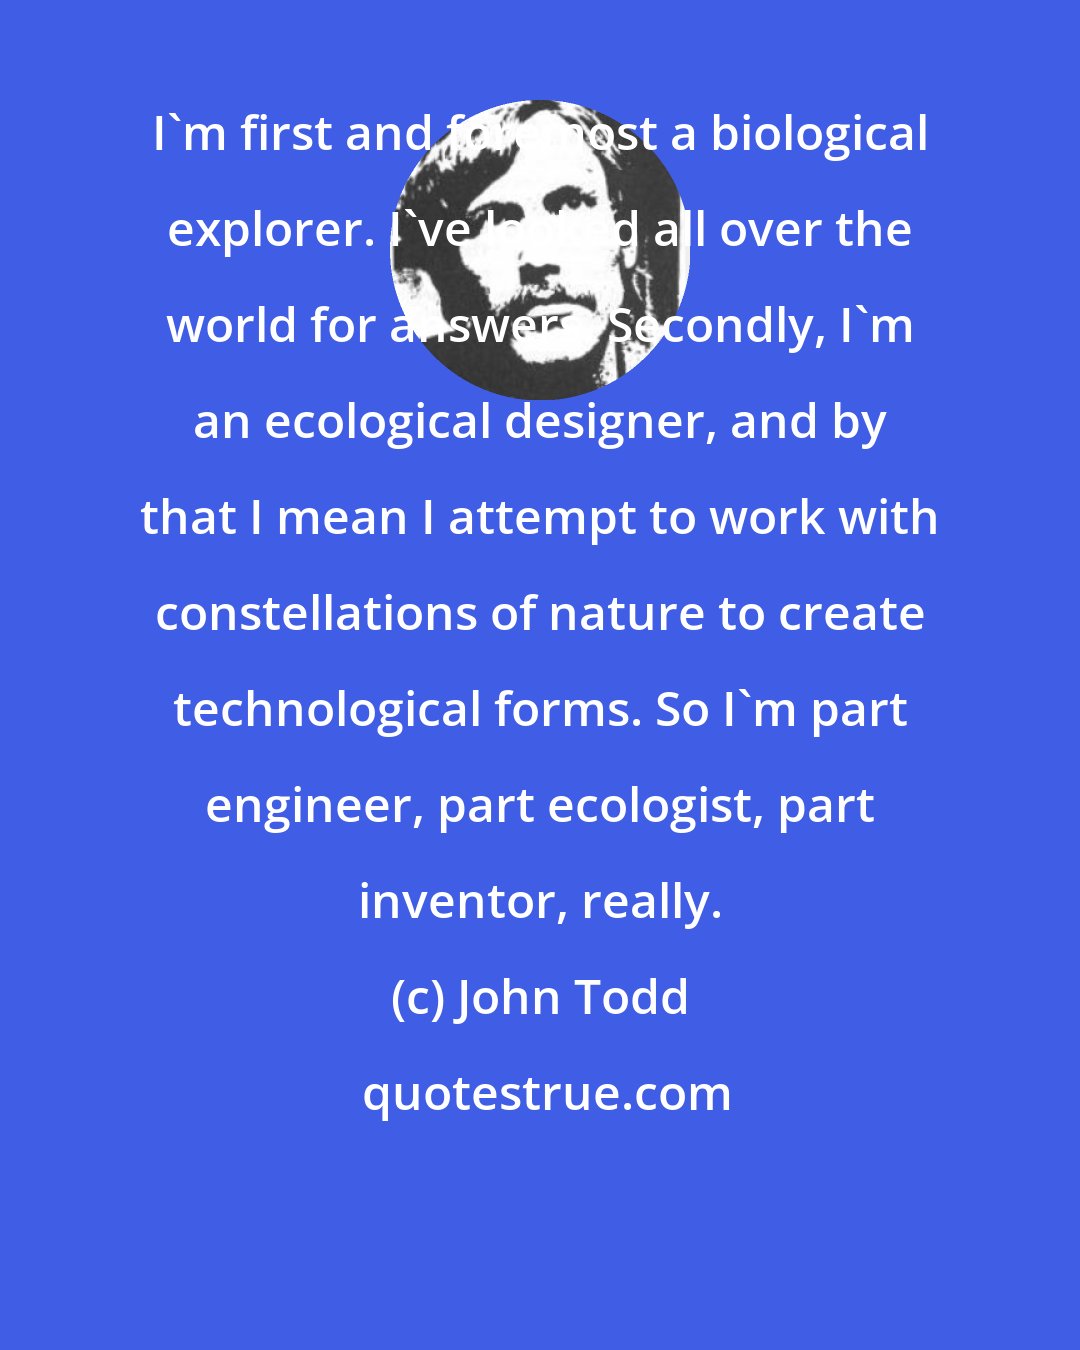 John Todd: I'm first and foremost a biological explorer. I've looked all over the world for answers. Secondly, I'm an ecological designer, and by that I mean I attempt to work with constellations of nature to create technological forms. So I'm part engineer, part ecologist, part inventor, really.